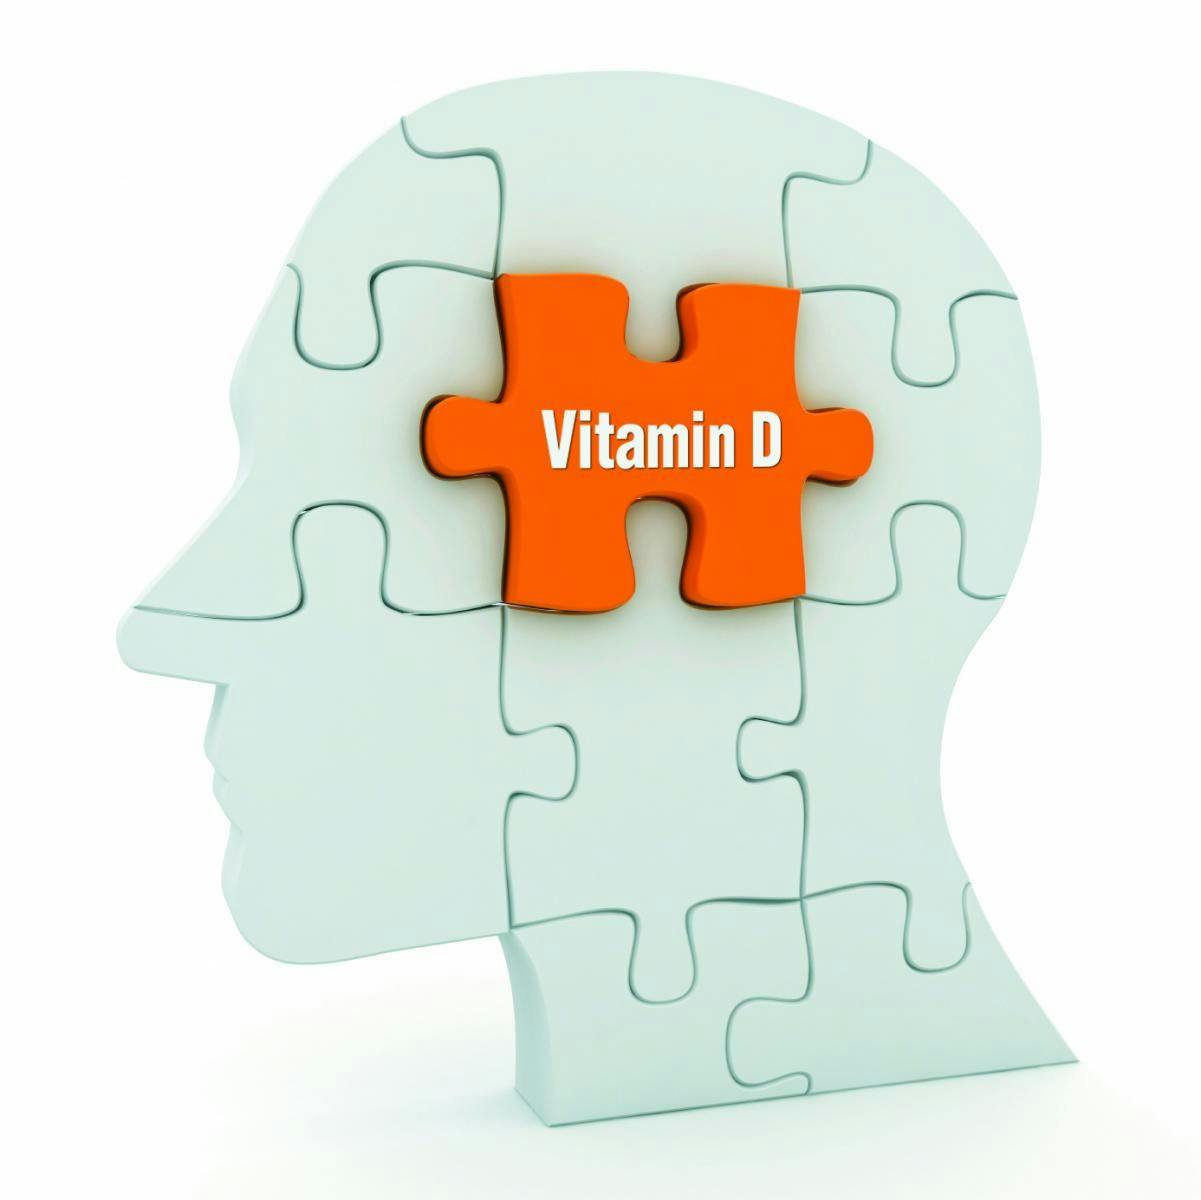 Vitamin D and Brain Health: Smart Ways to Think about Vitamin D